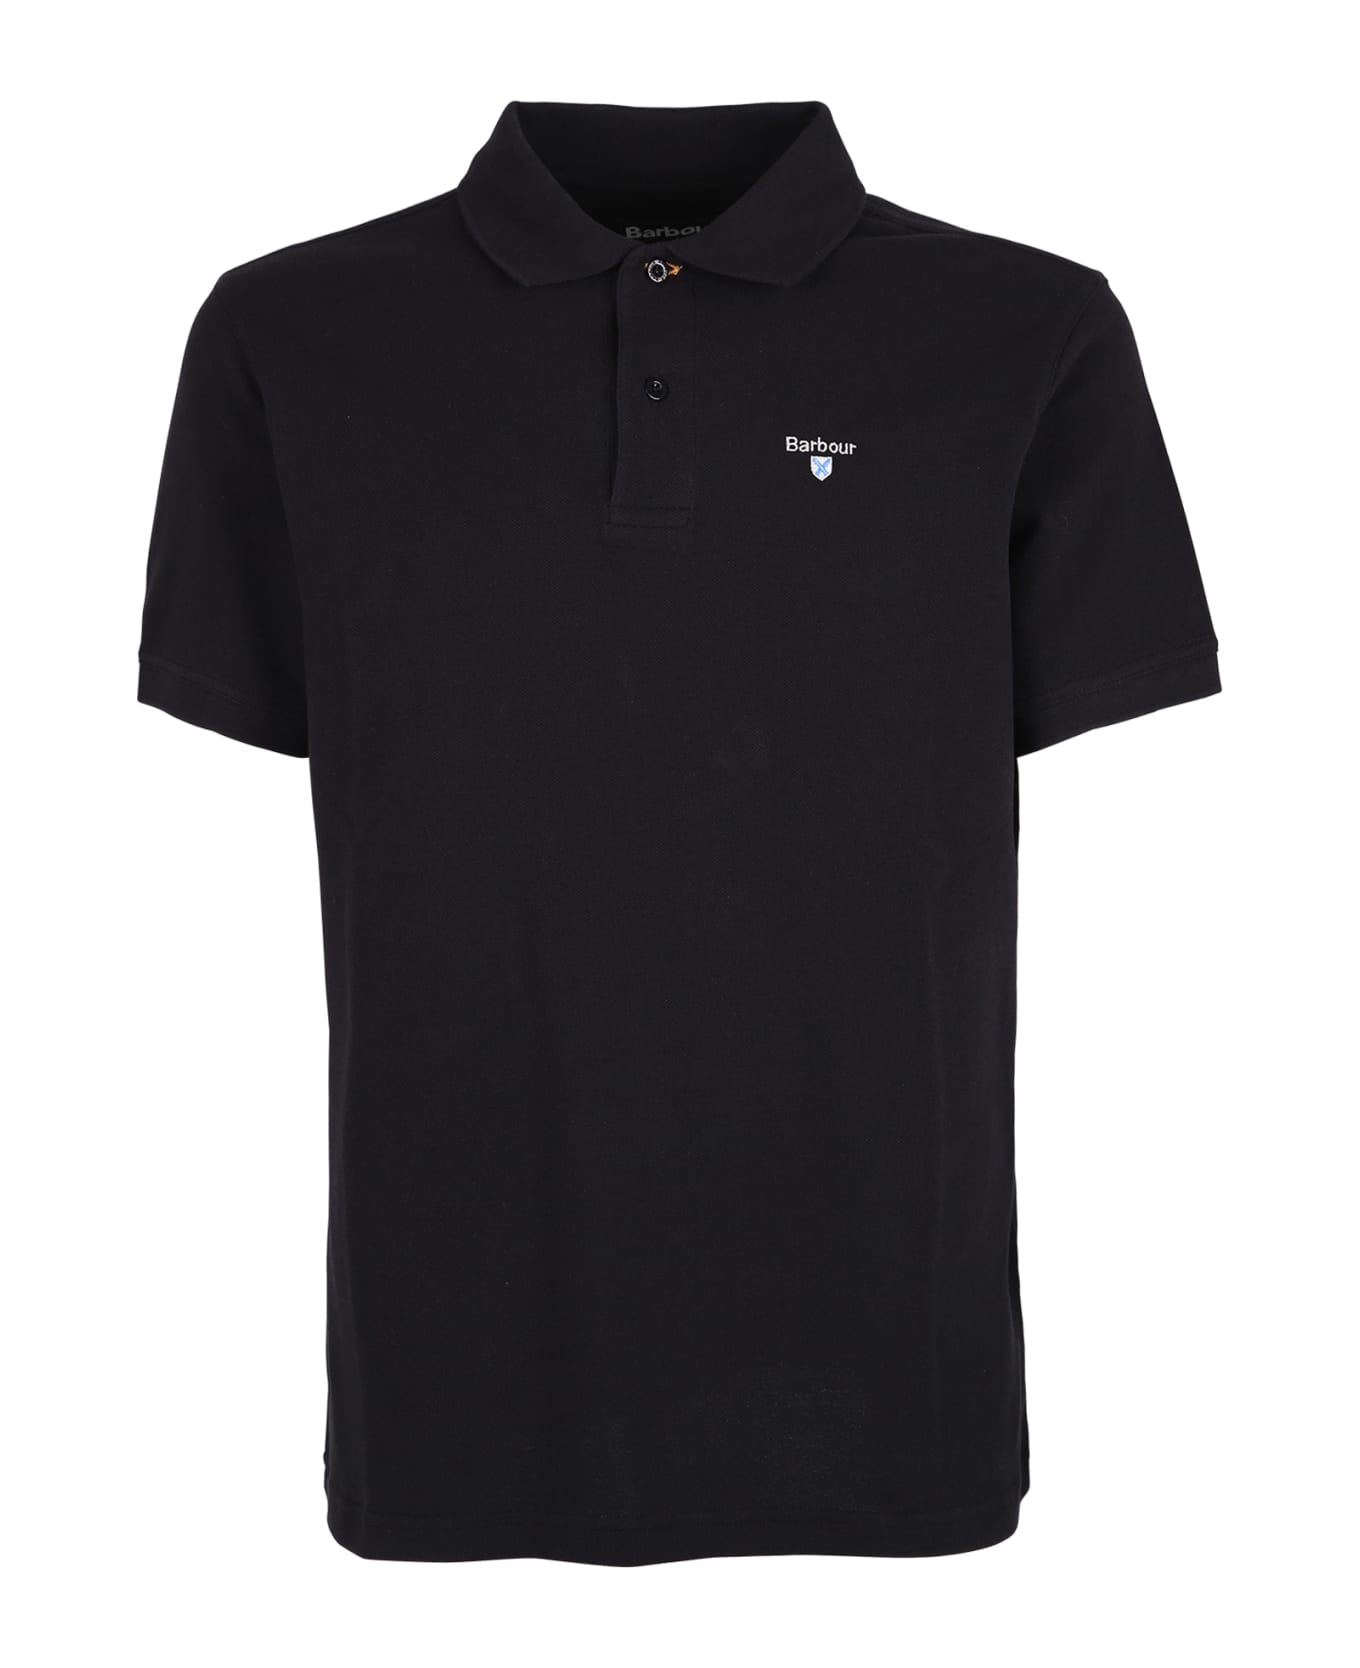 Barbour Logo Embroidered Polo Shirt - Black シャツ